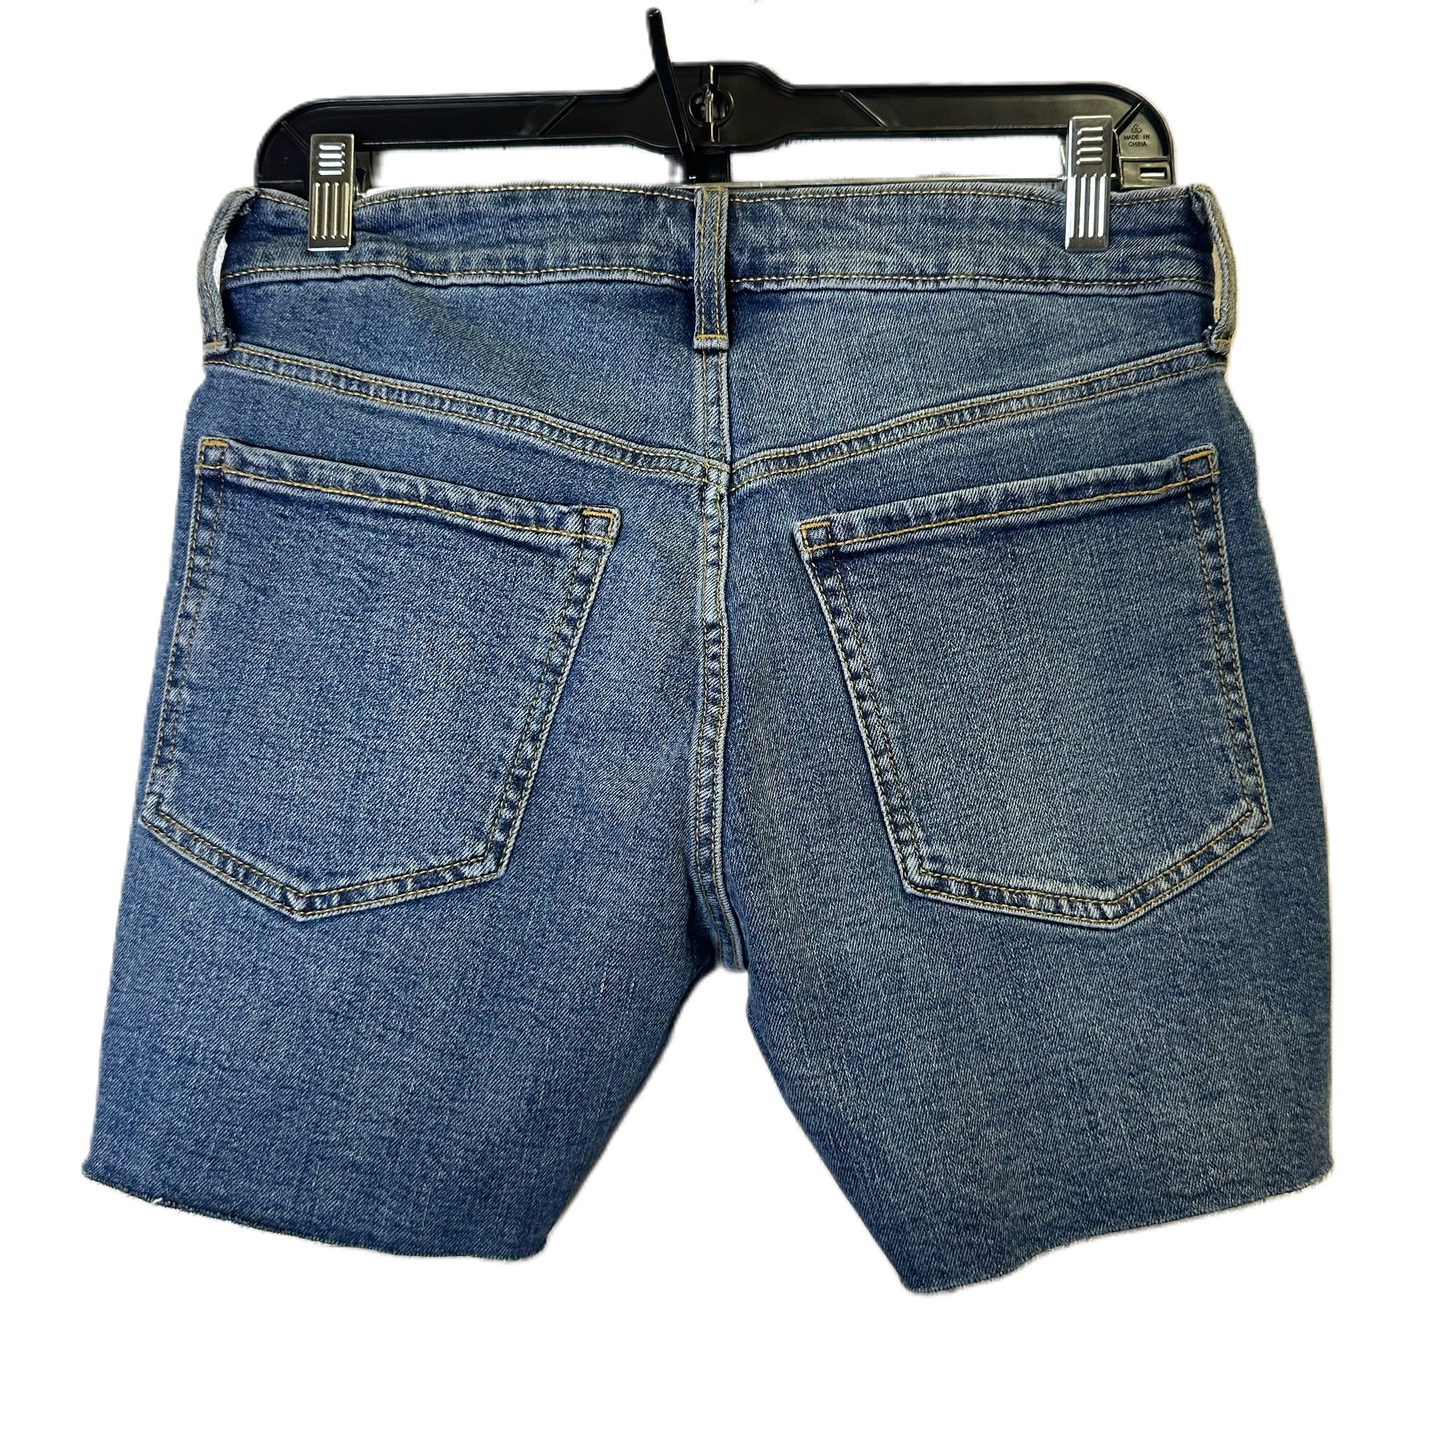 Blue Denim Shorts Athletic By Old Navy, Size: 6